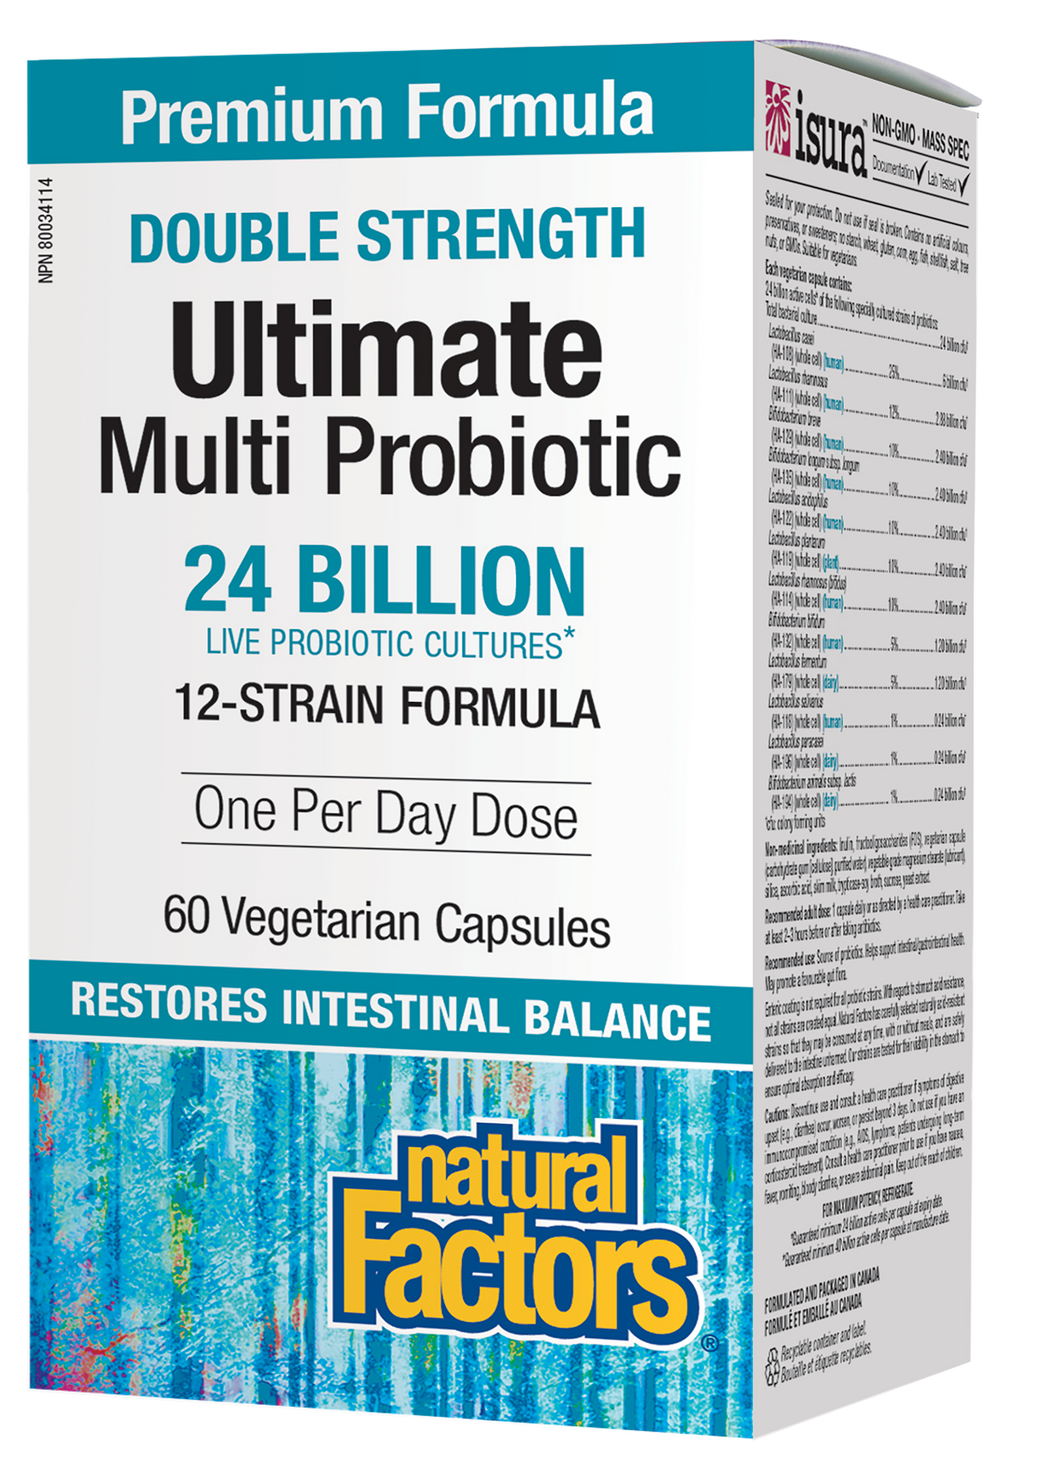 Natural Factors Double Strength Ultimate Multi Probiotic is a one-per-day 12-strain formula featuring a guaranteed total of 24 billion colony forming units at expiry to comprehensively support gastrointestinal health.